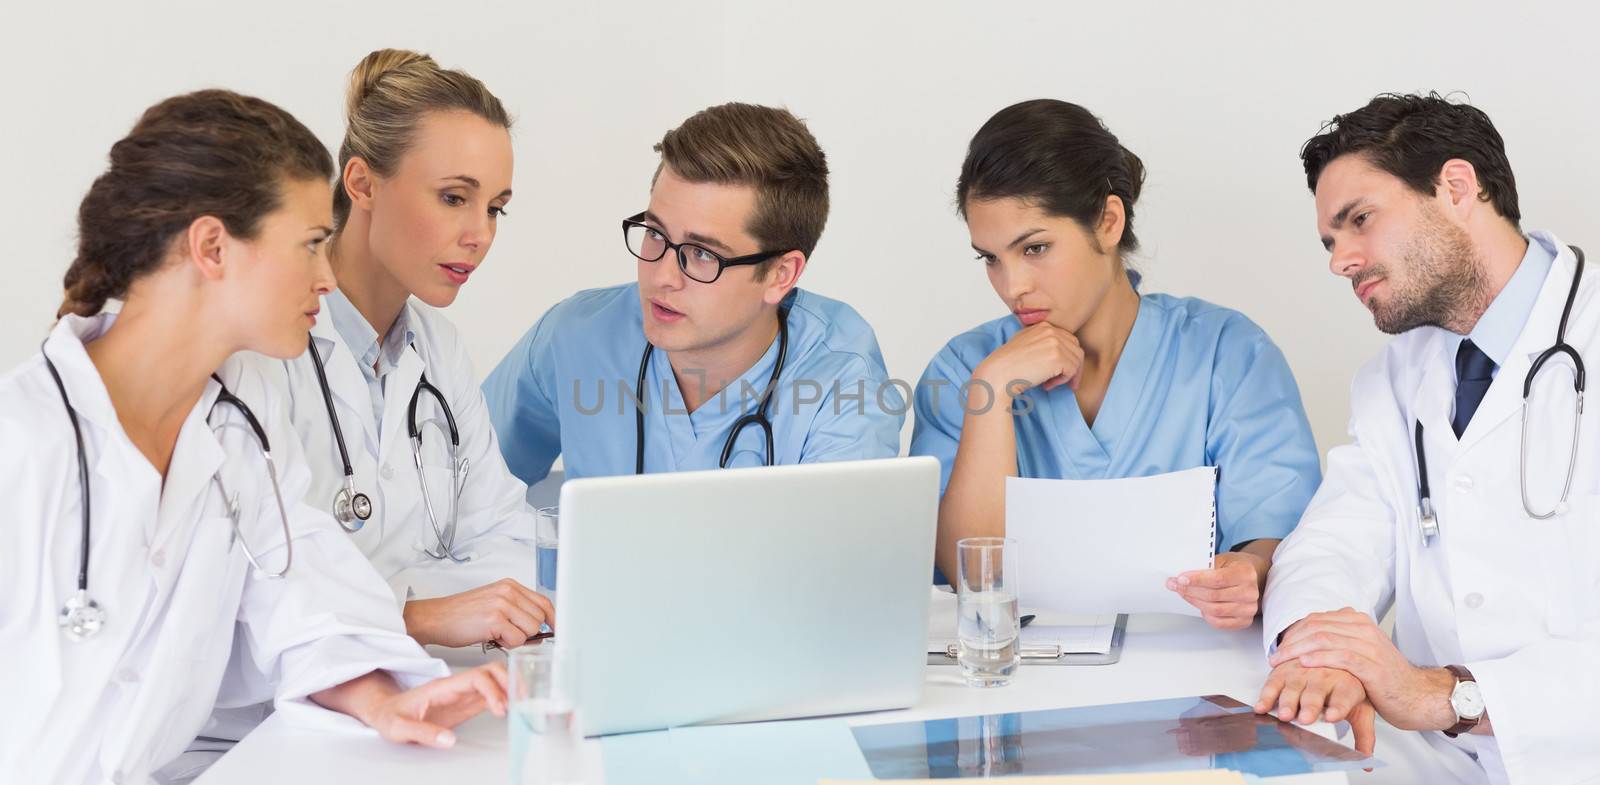 Medical team discussing over laptop in hospital